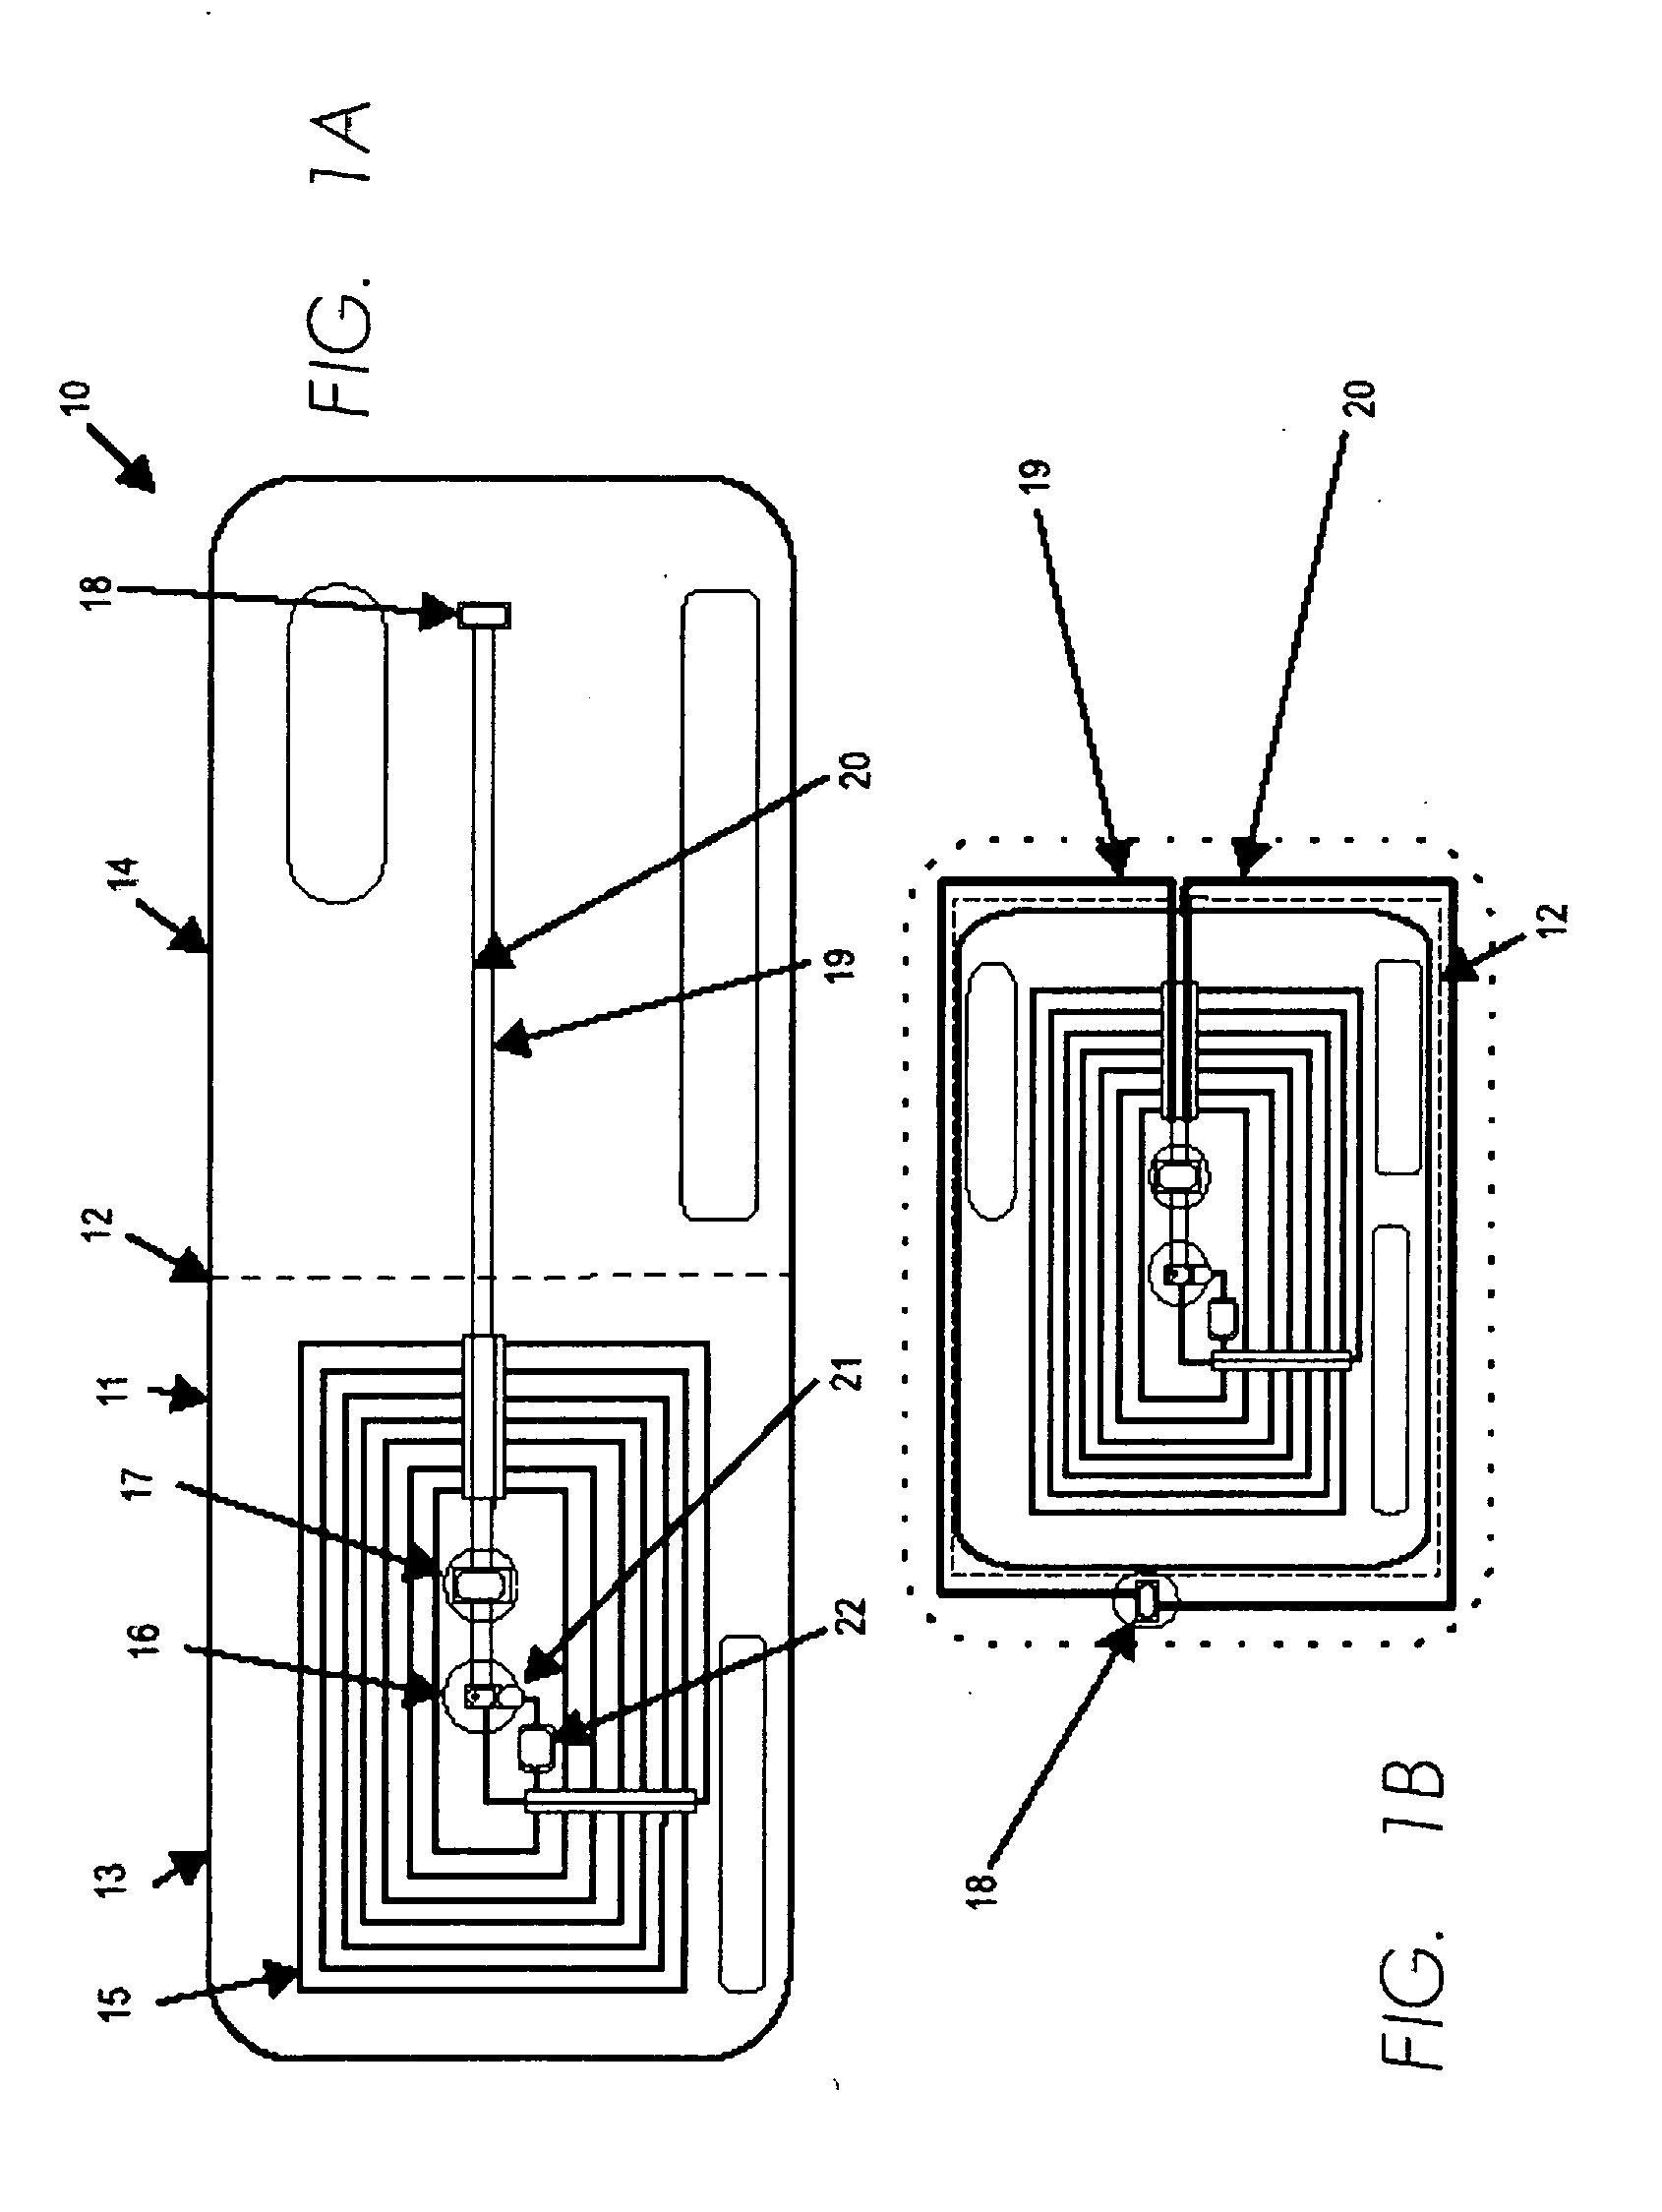 Method and apparatus for providing identification